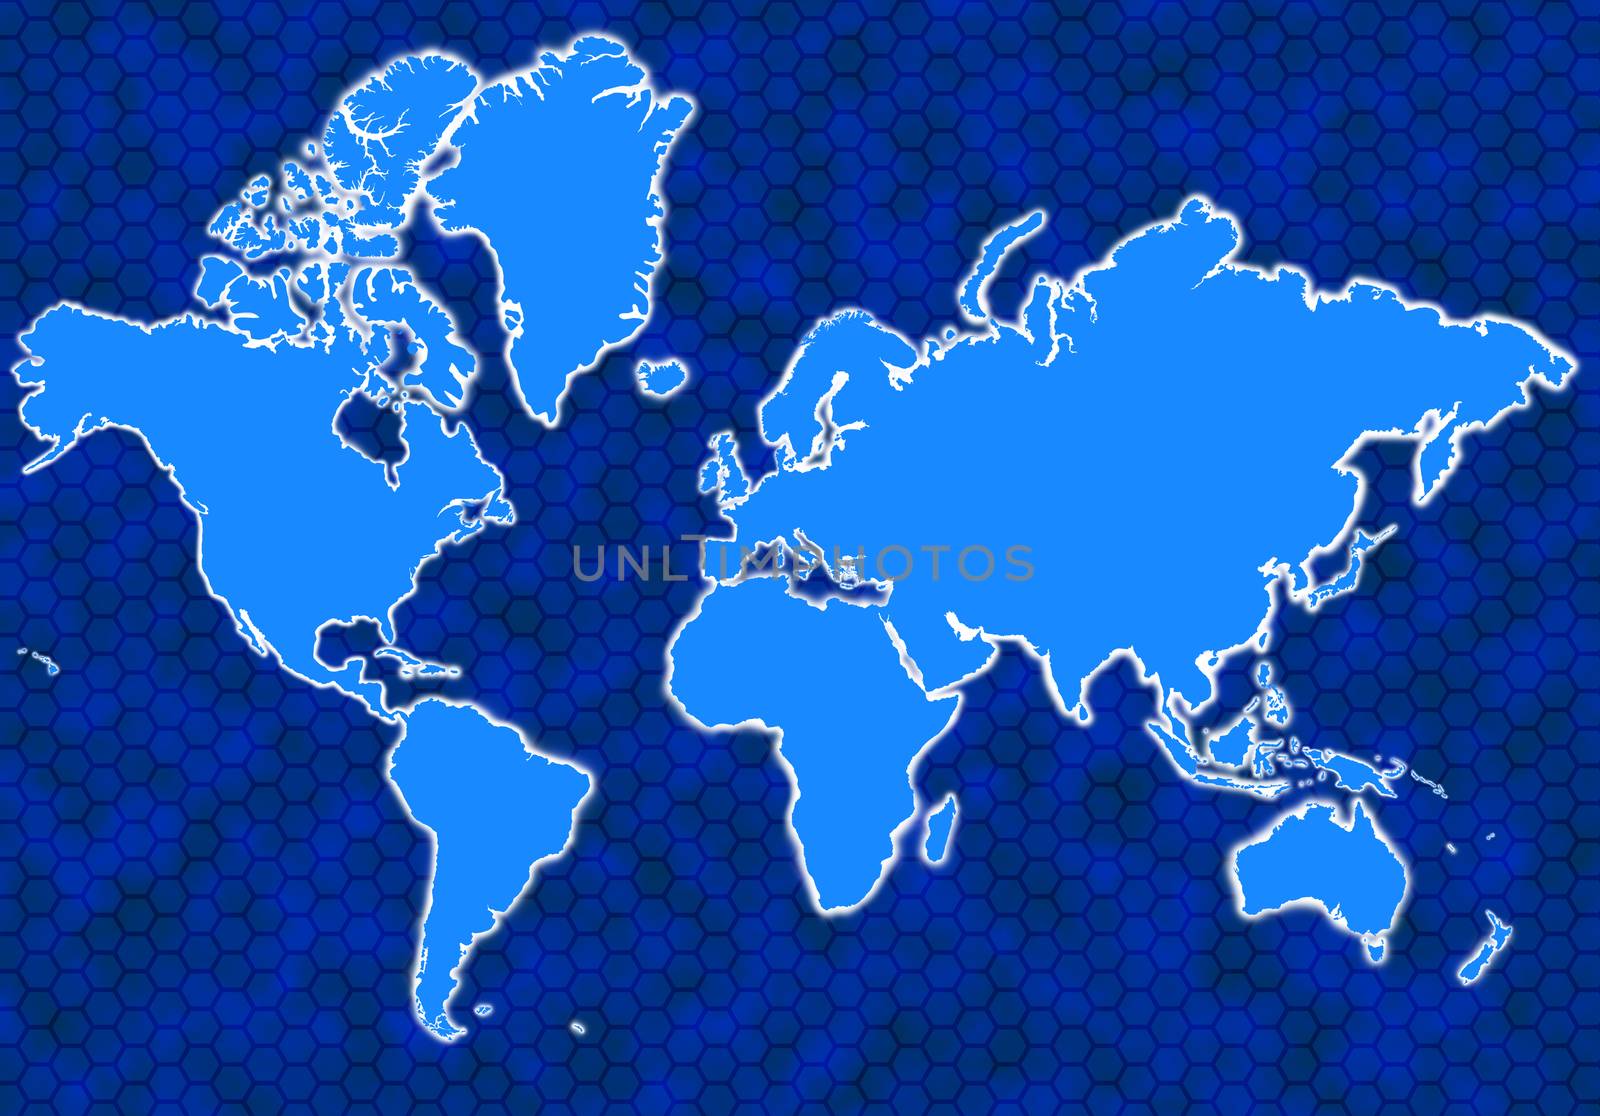 Blue global map with glowing continents and background hexagons